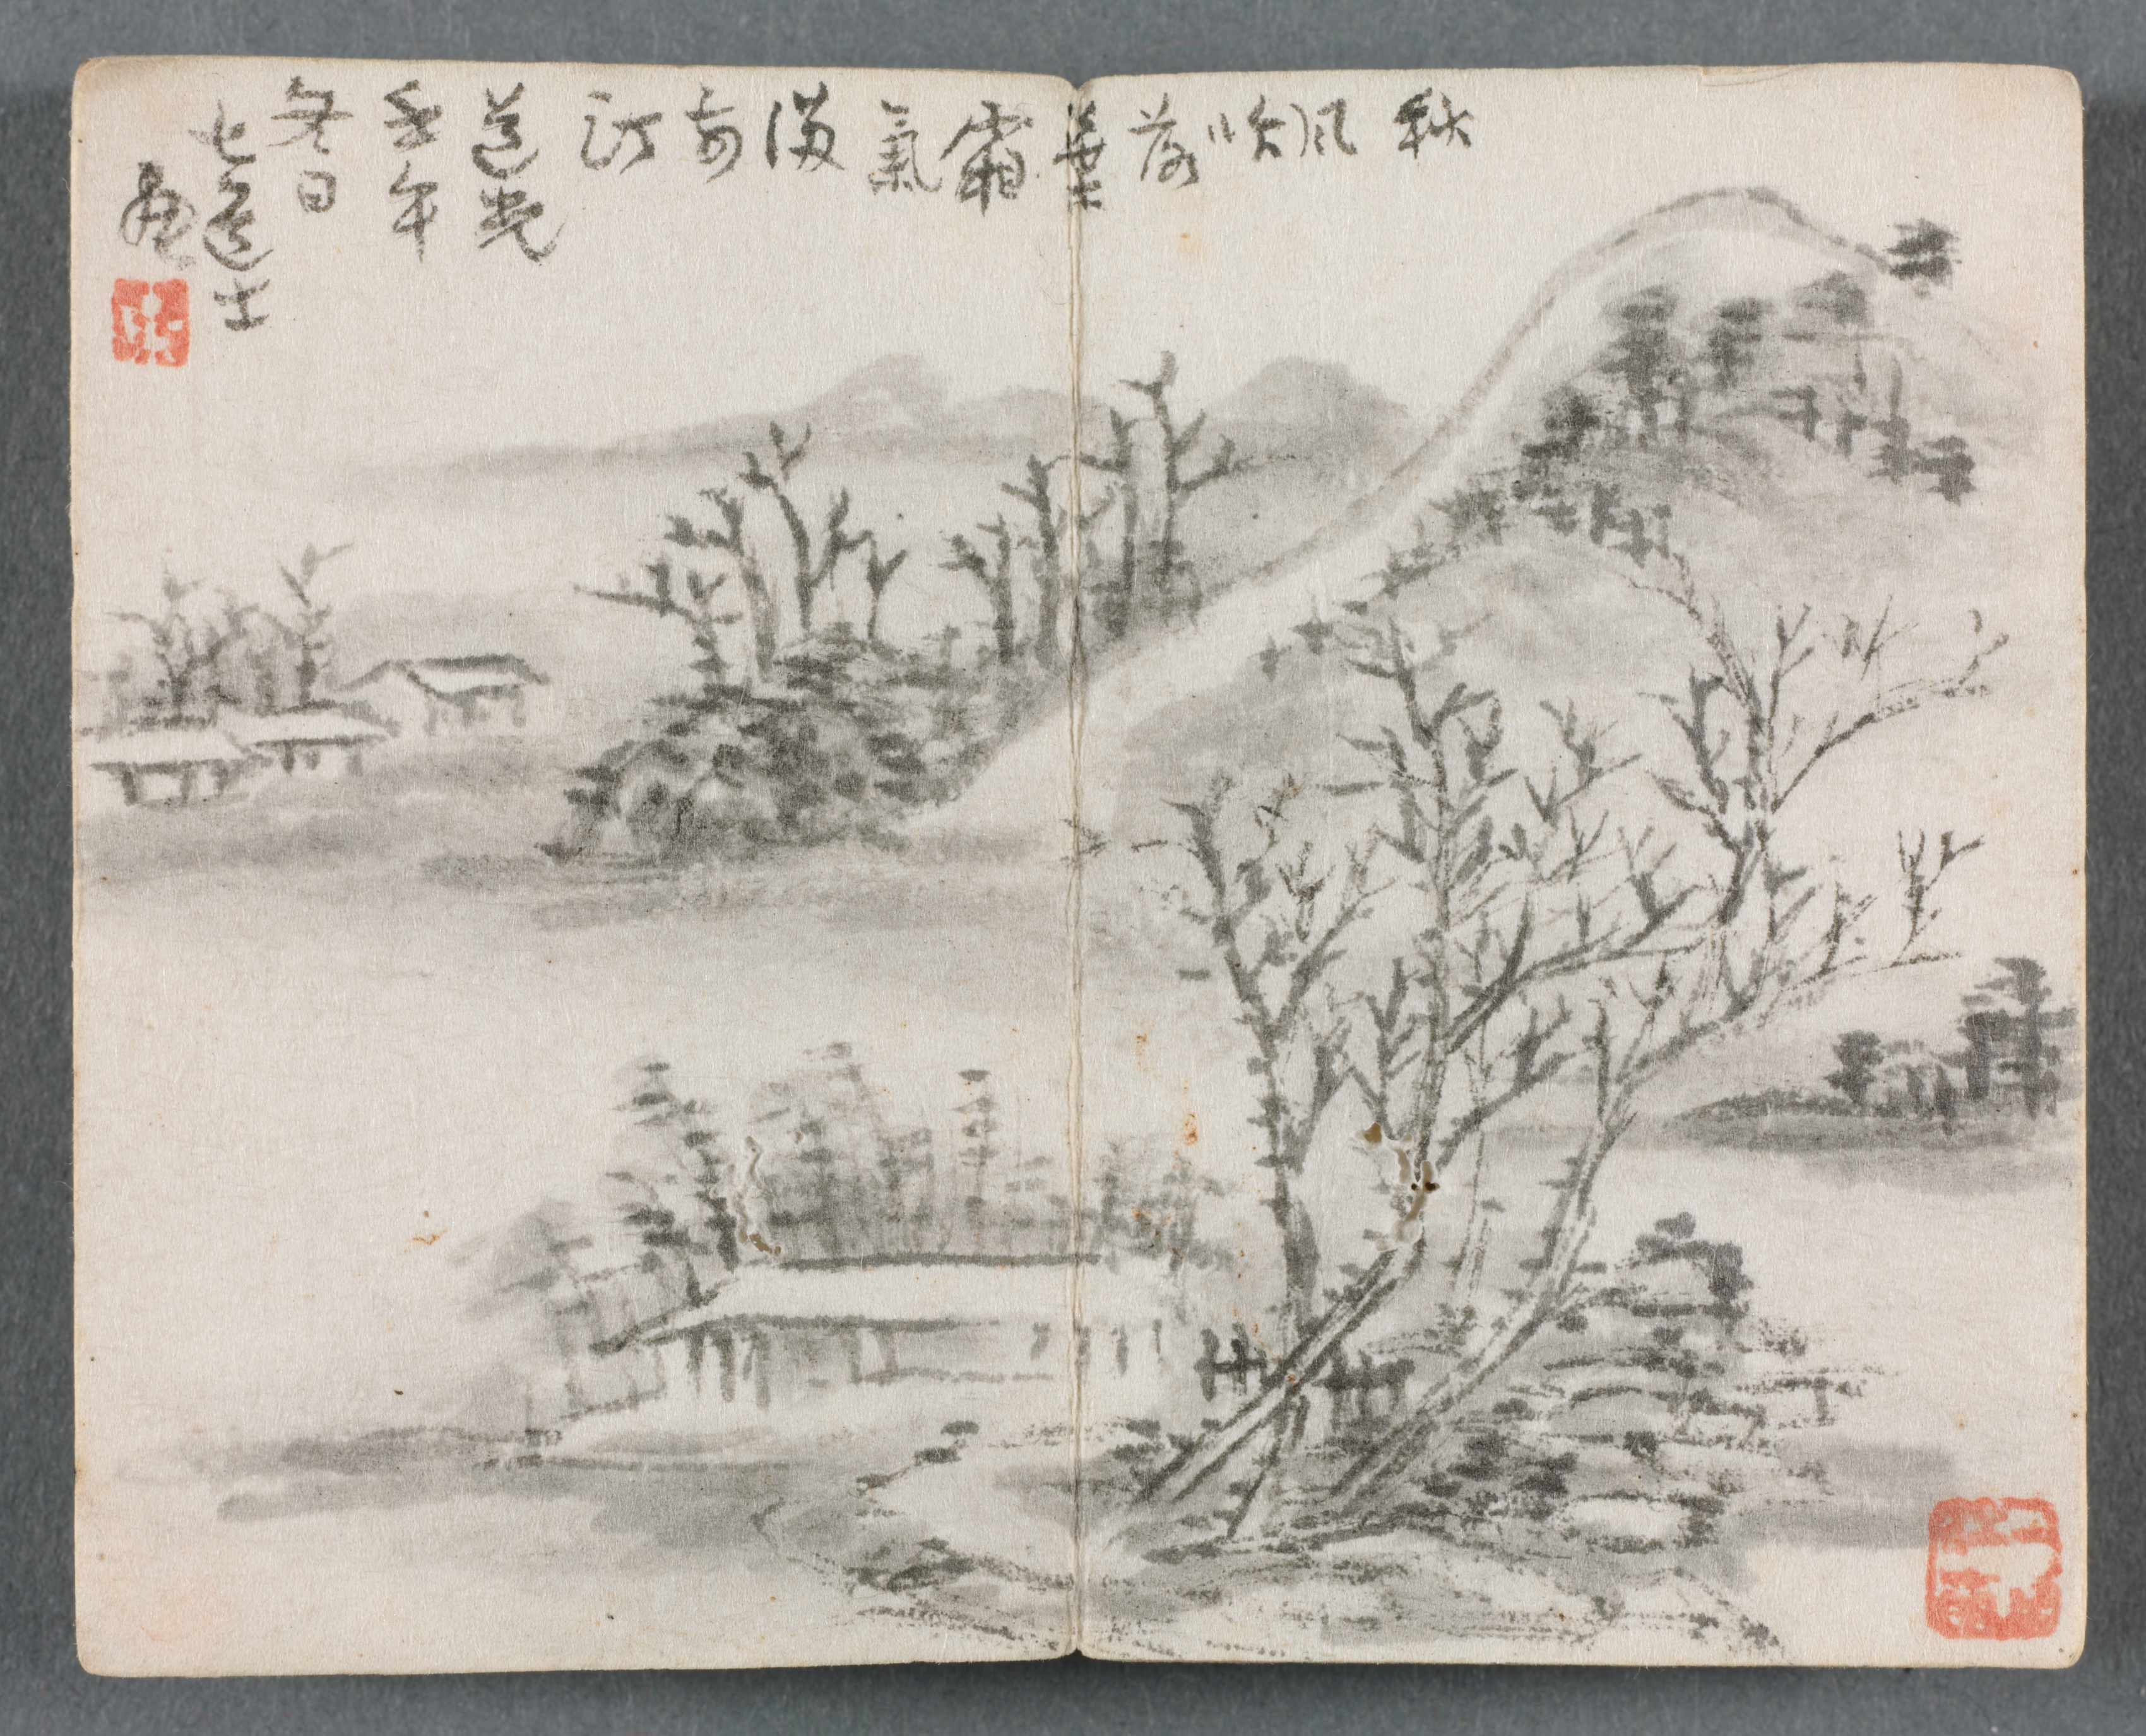 Miniature Album with Figures and Landscape (Landscape with Hill)